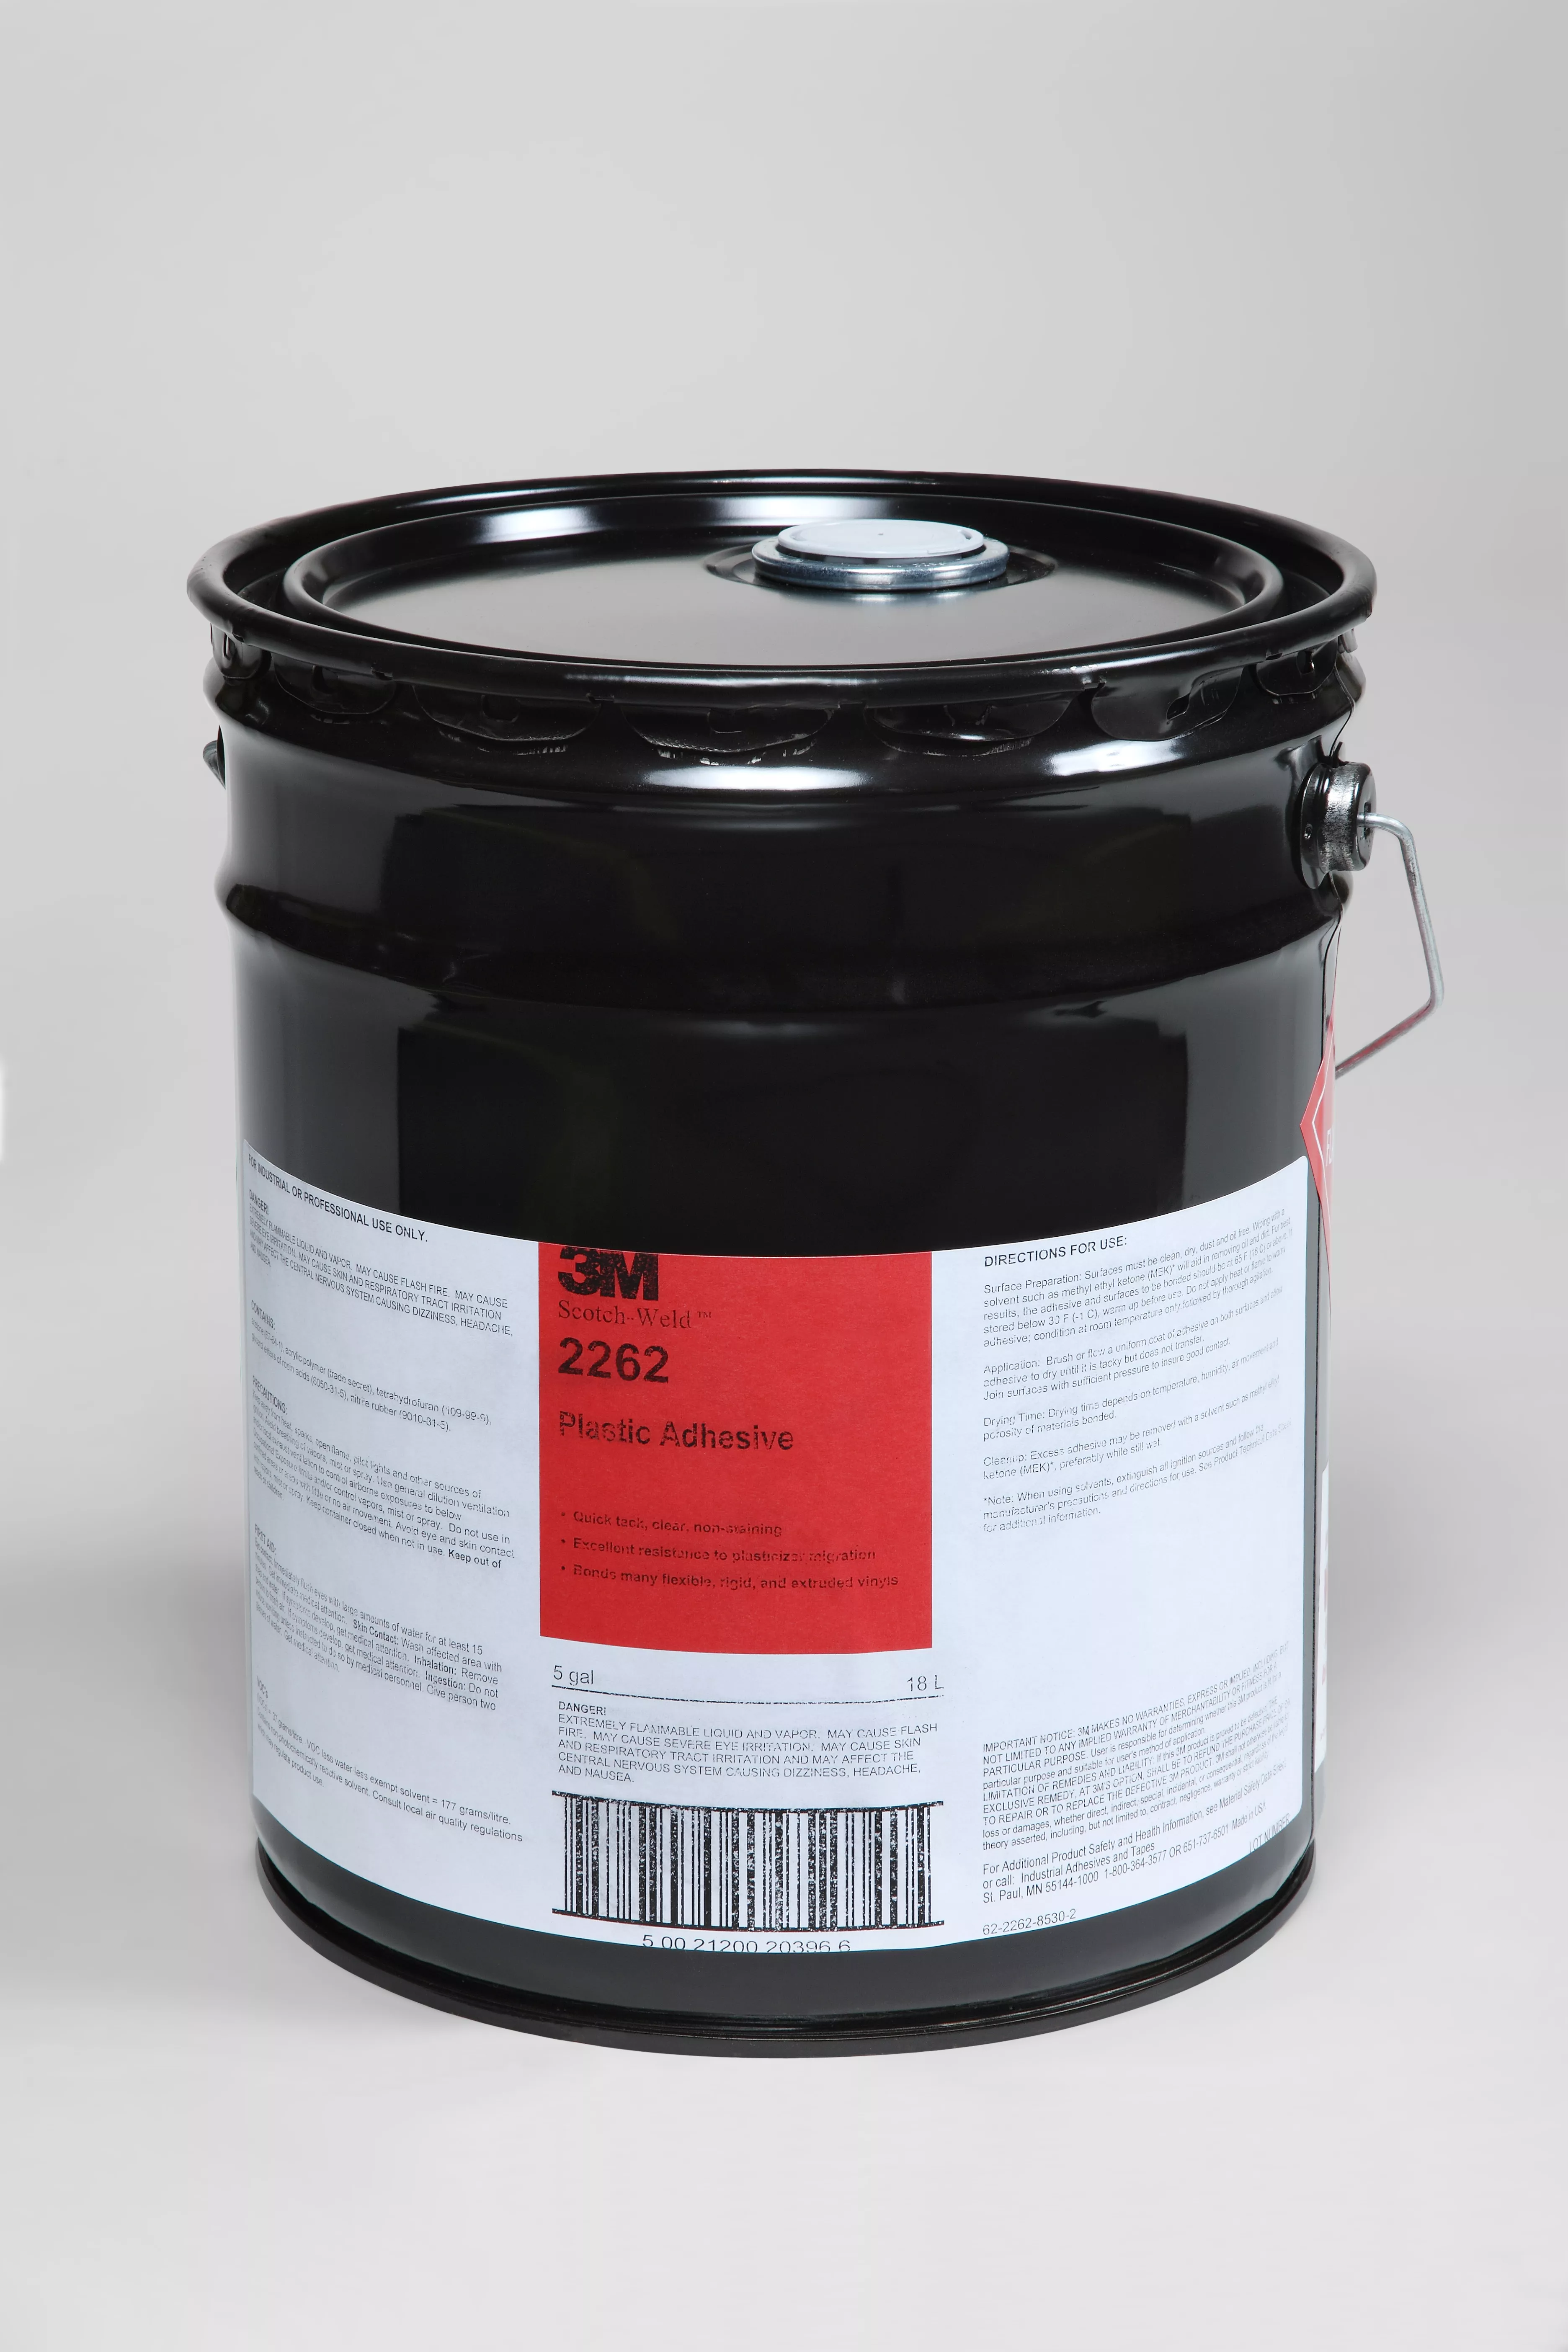 3M™ Plastic Adhesive 2262, Clear, 5 Gallon (Pail), 1 Can/Drum